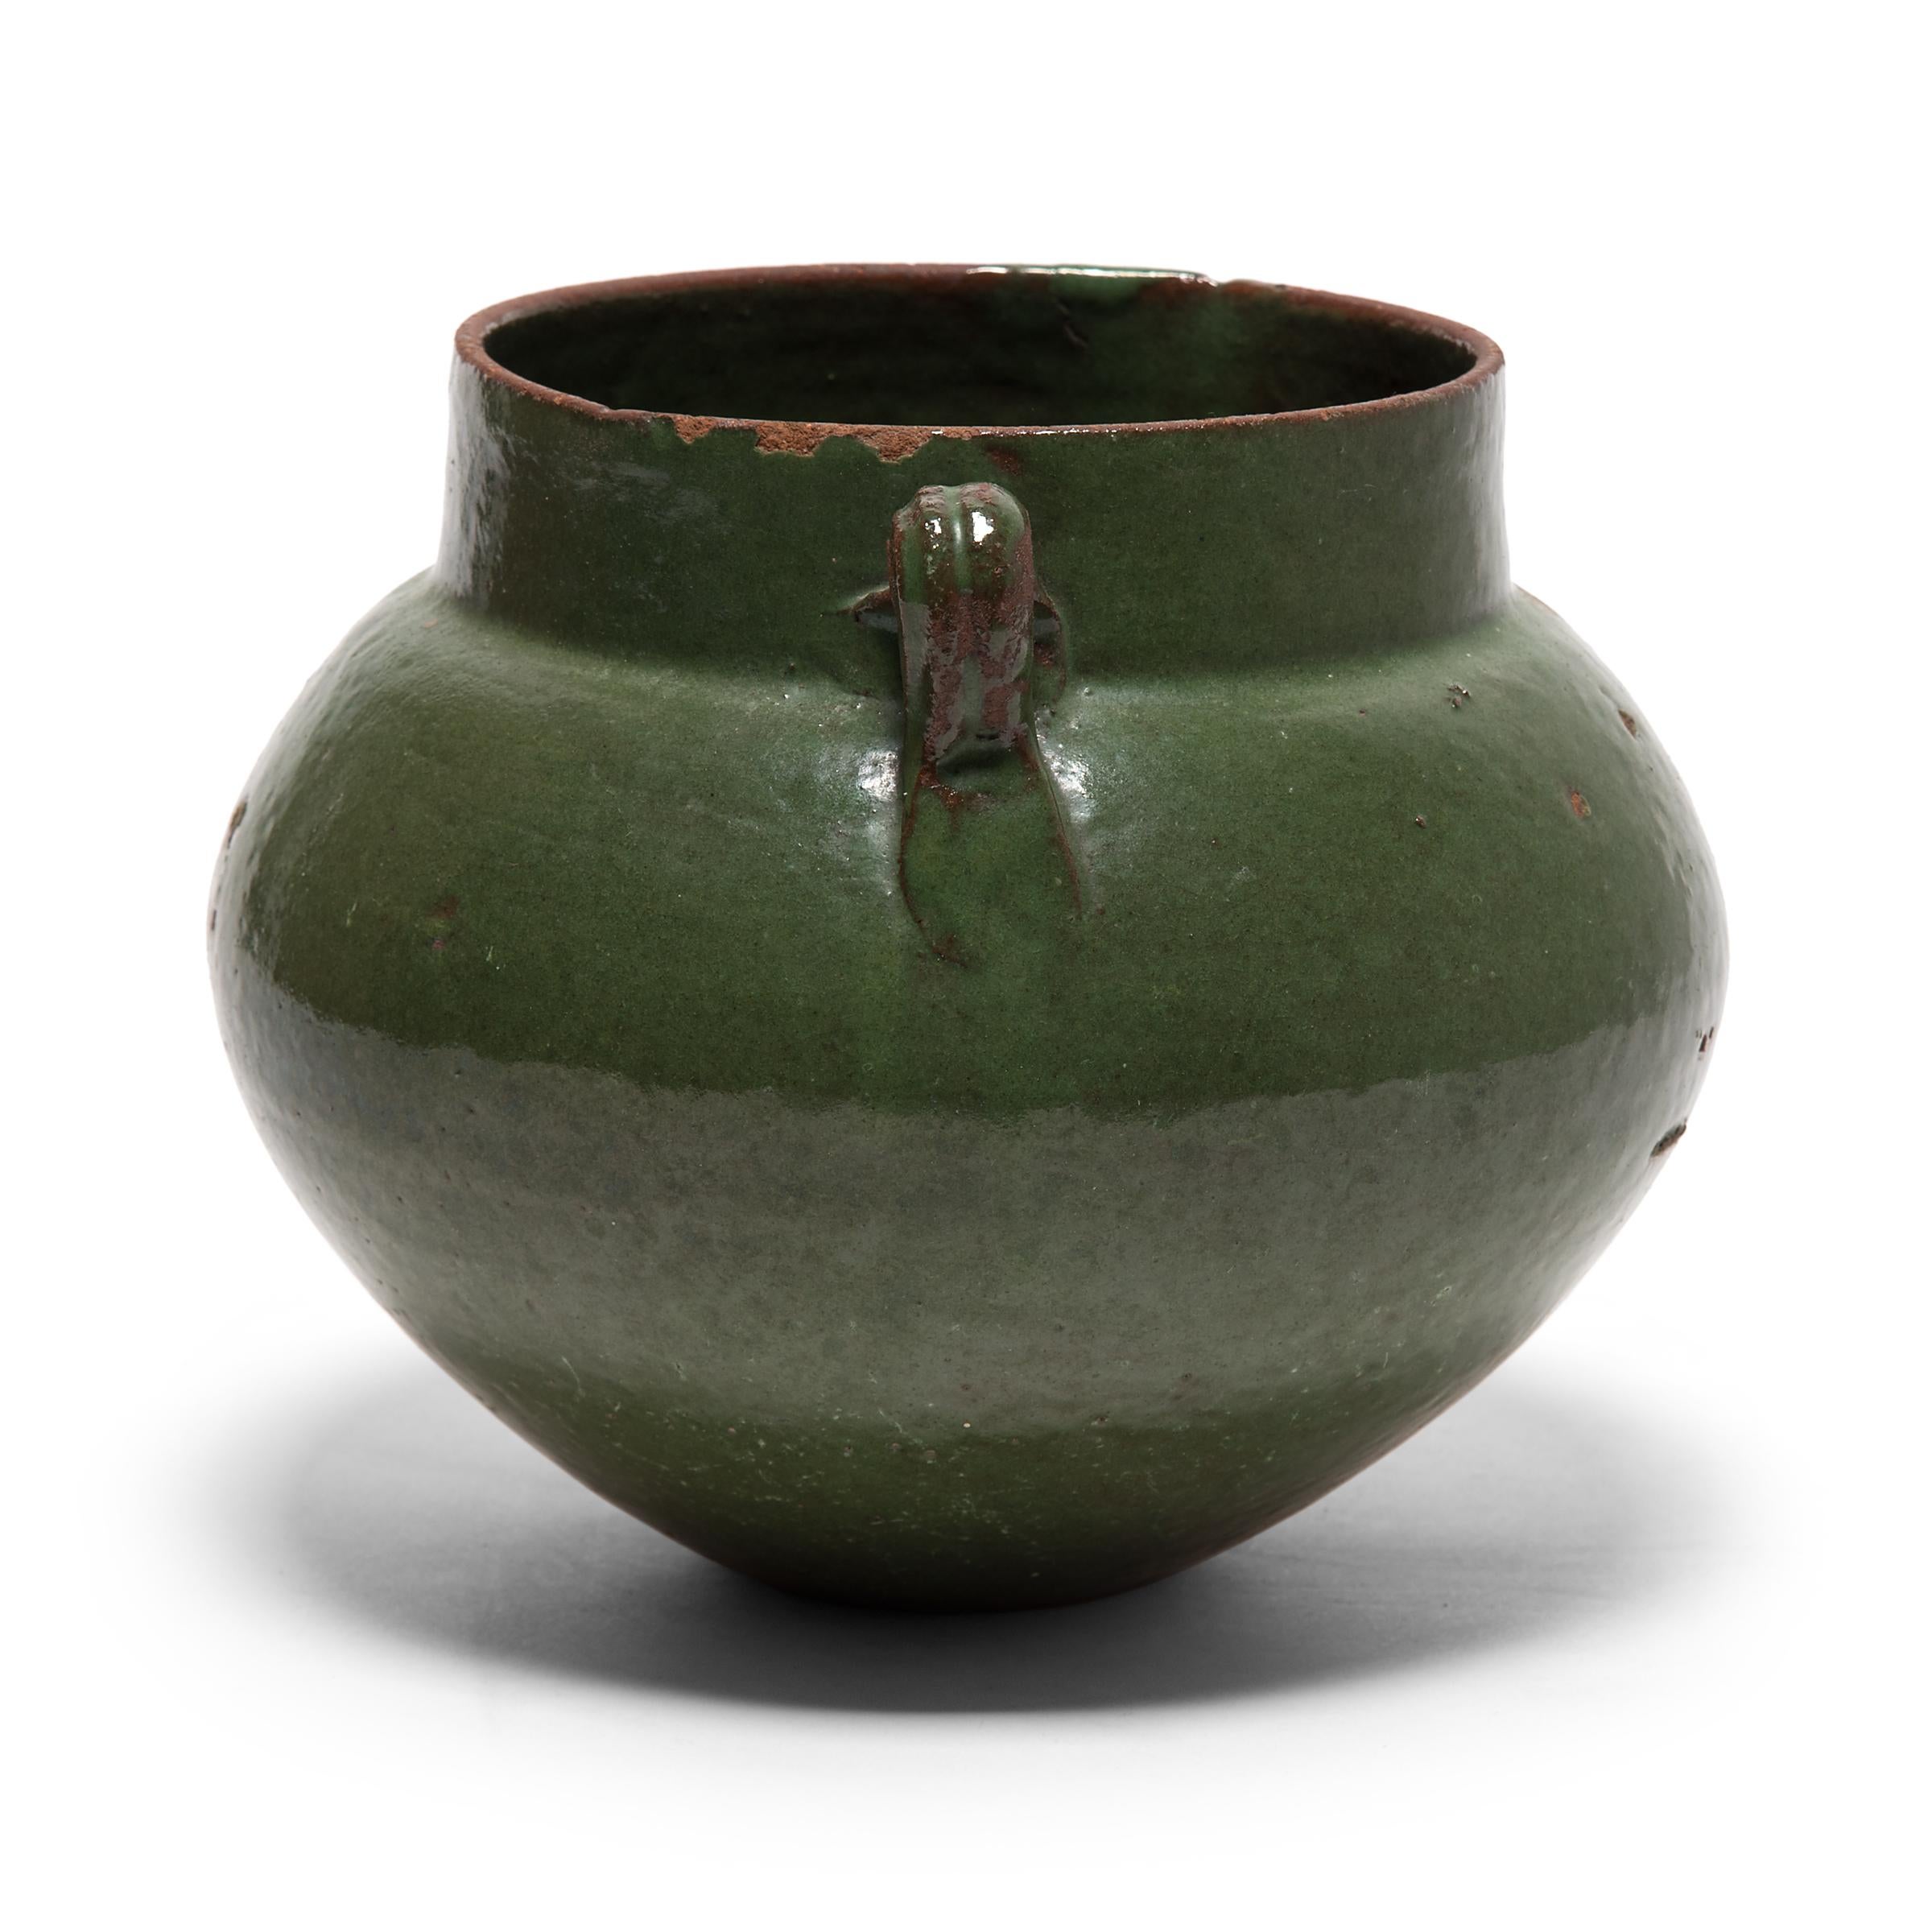 Tracing its roots back into the Han dynasty, this early 20th century vessel emulates the full-bodied shapes and unusual glazing found in ancient ceramics. Finely sculpted with thin walls, the jar has a squat, globular form that tapers from bulging